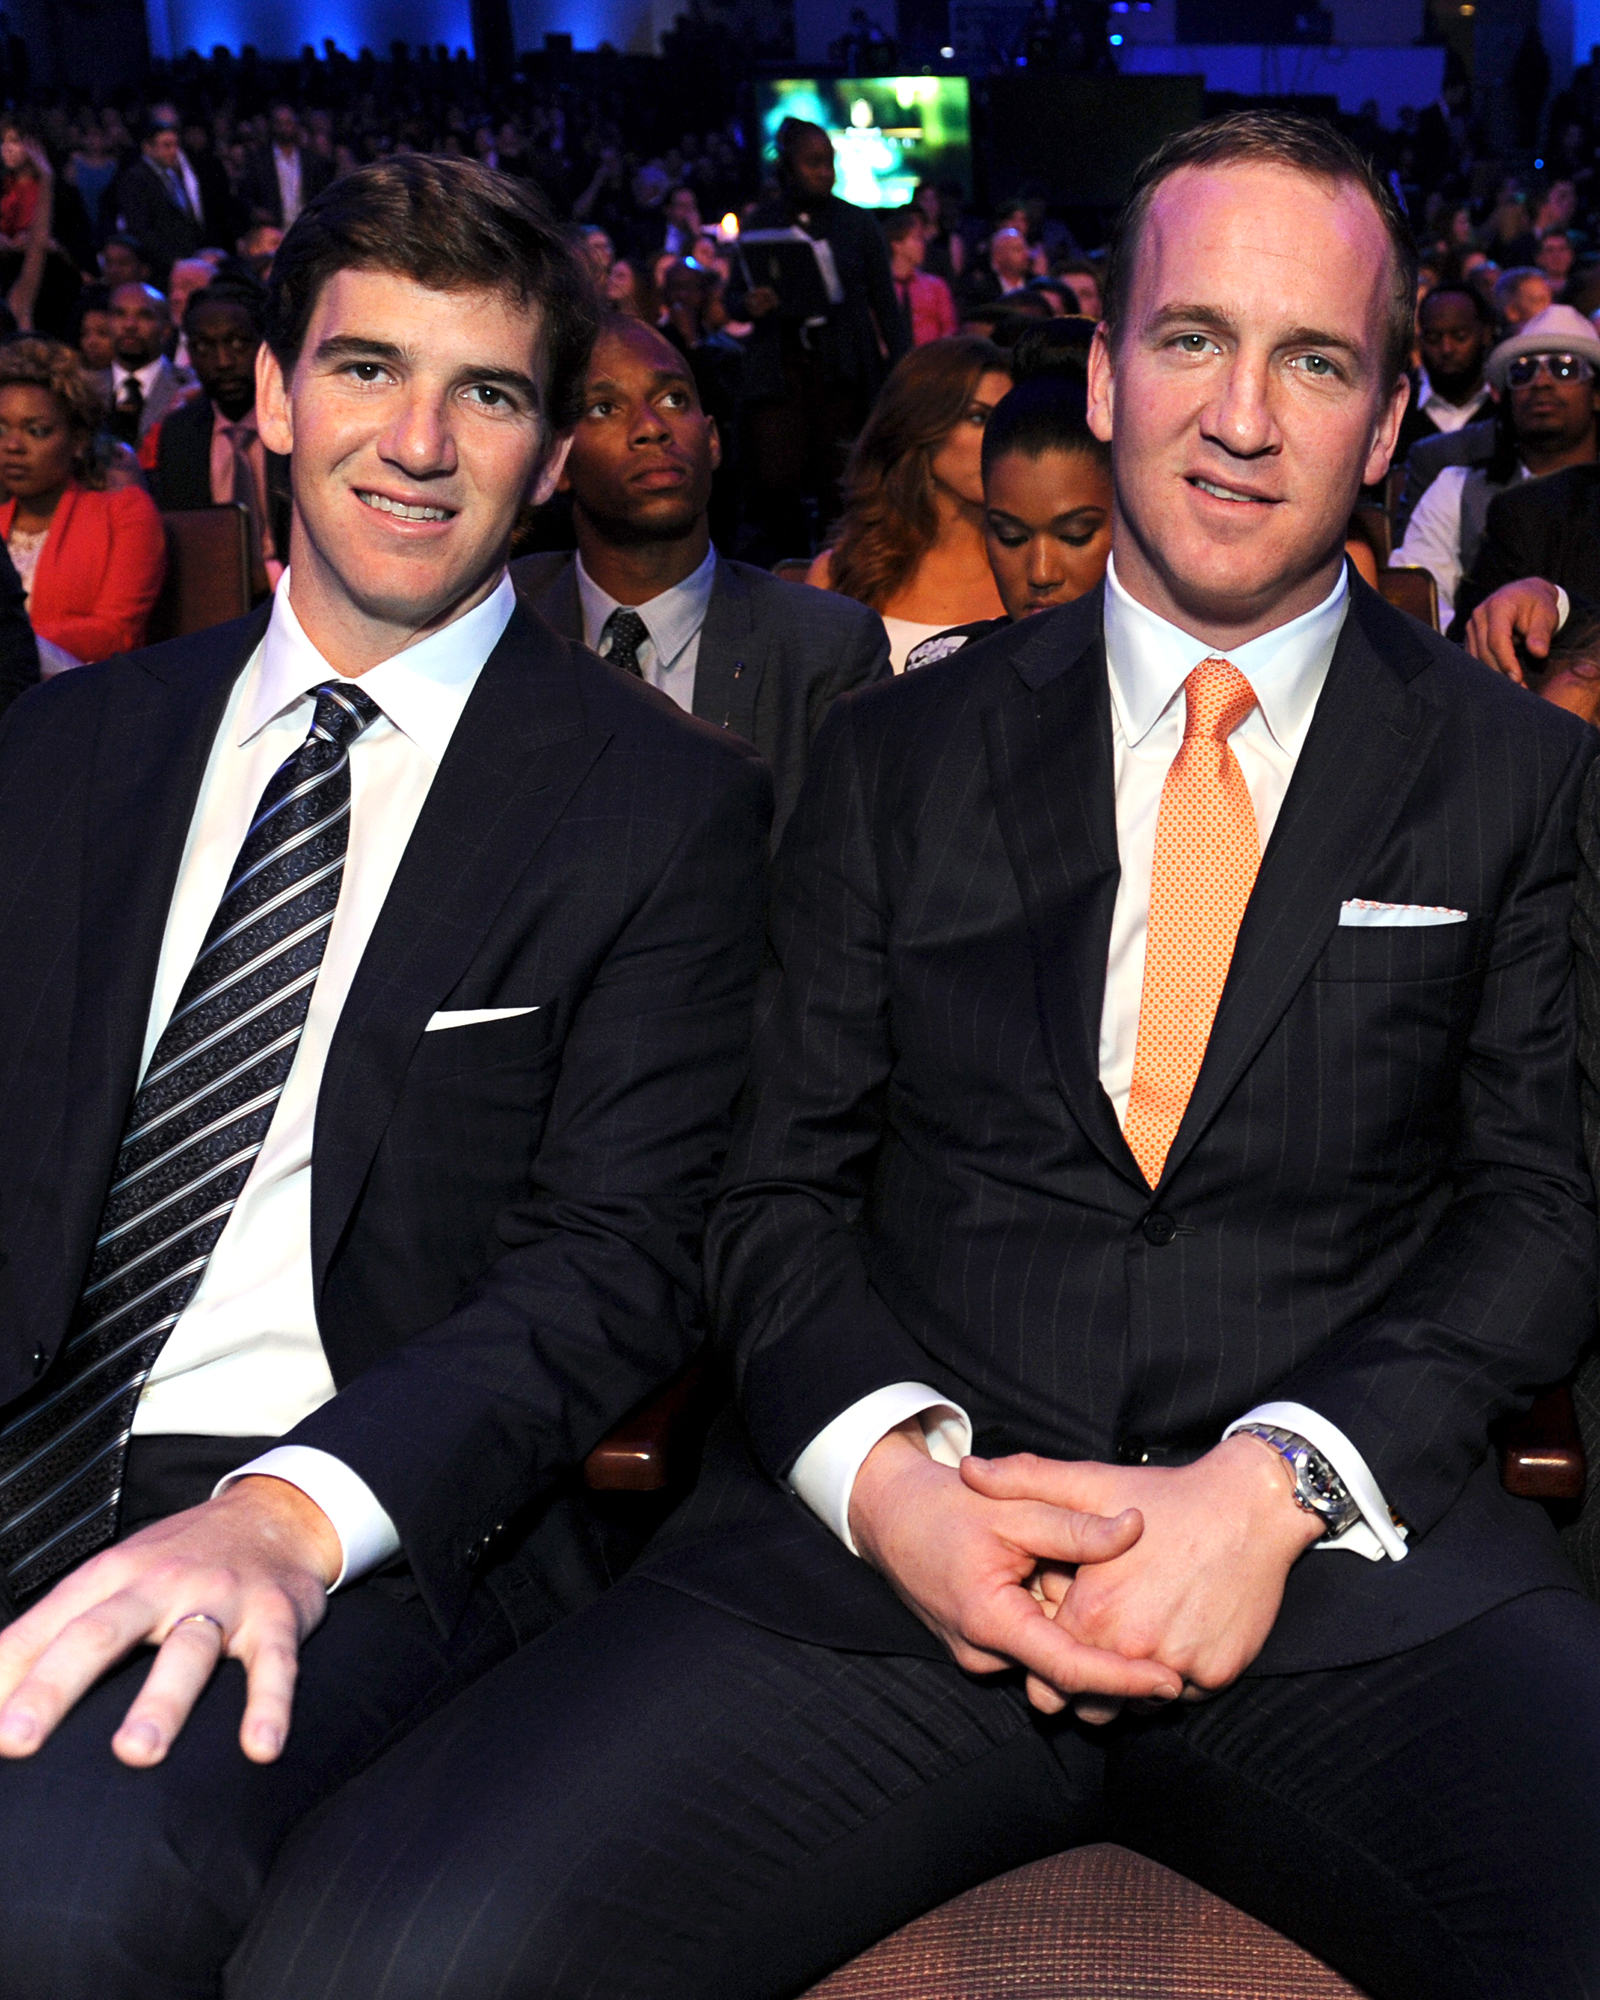 NFL Super Bowl 50, Eli Manning wants brother Peyton to win Super